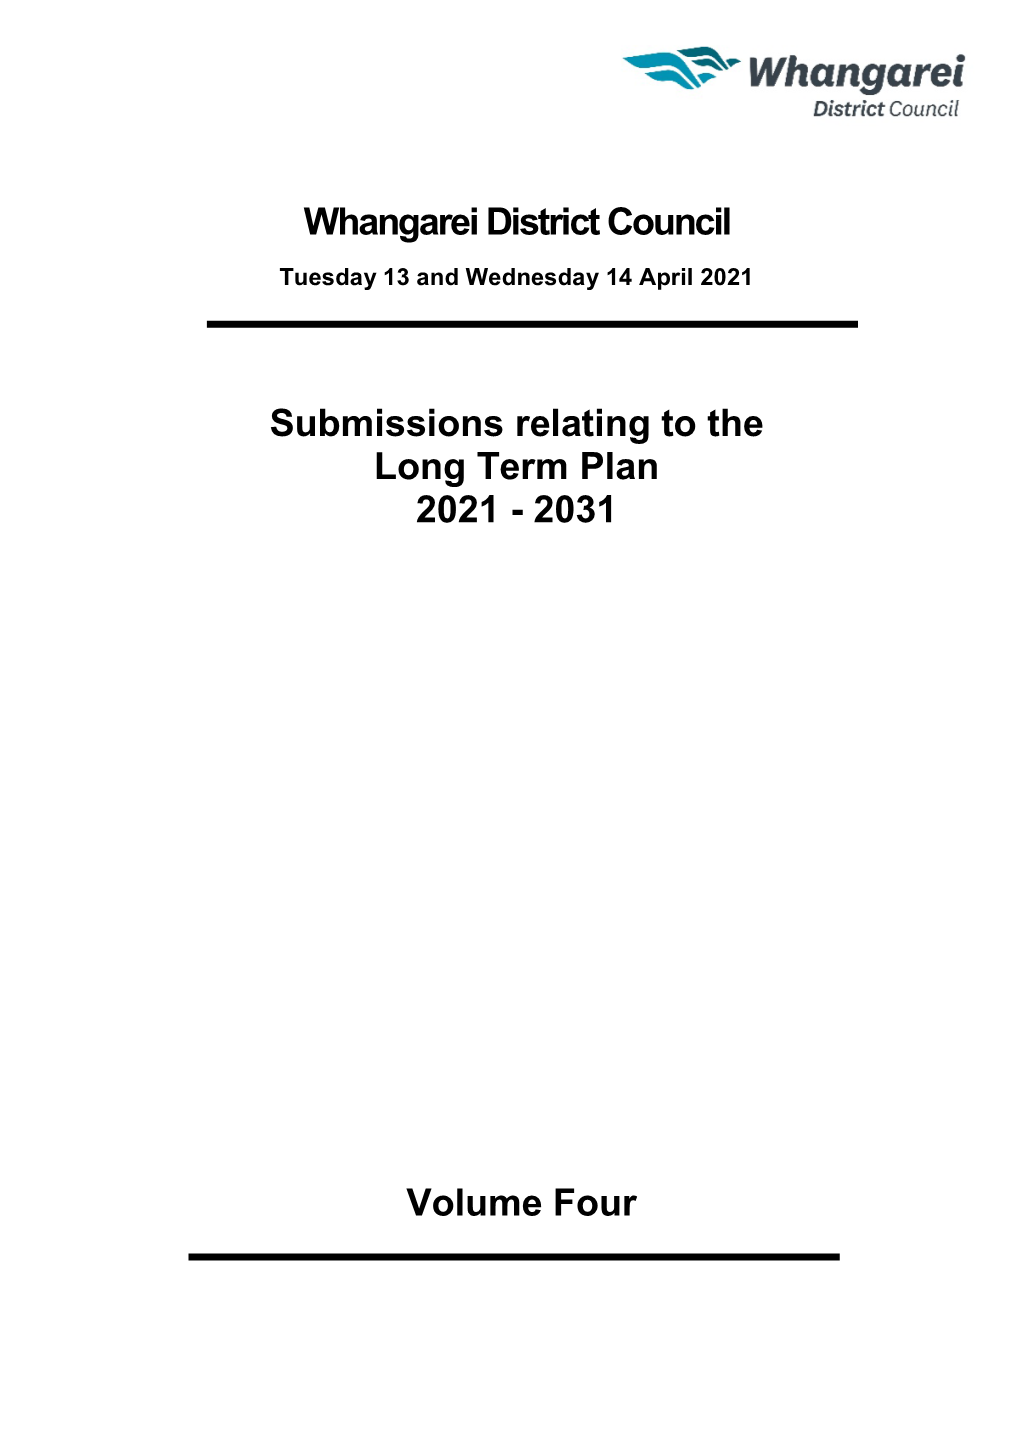 Whangarei District Council Submissions Relating to the Long Term